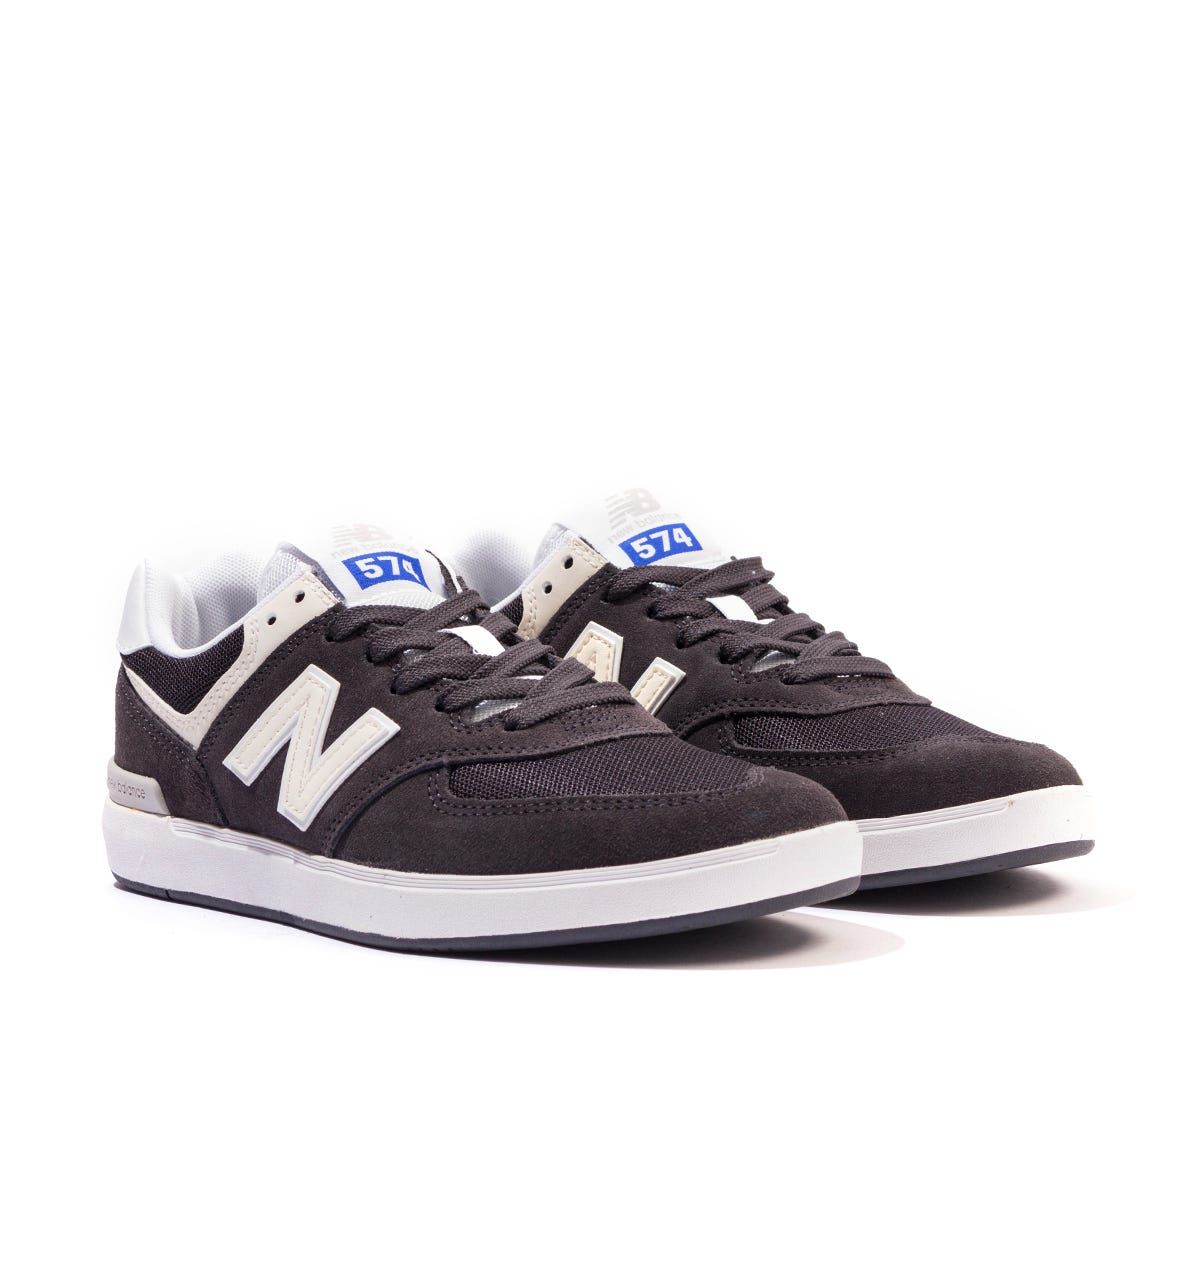 New Balance is an icon when it comes to footwear, renowned for creating innovative, stylish, comfortable trainers. The signature N logo has ties within baseball, boxing and running; they don\'t just look great but they enhance the performance of the wearer. A confidence-boosting addition to any wardrobe. Men\'s All Coasts 574 New Balance trainersSuede & Mesh UppersTextile LiningDurable Rubber OutsoleREVlite Midsole Cushioning Secure Lace-up ClosureNew Balance Branding